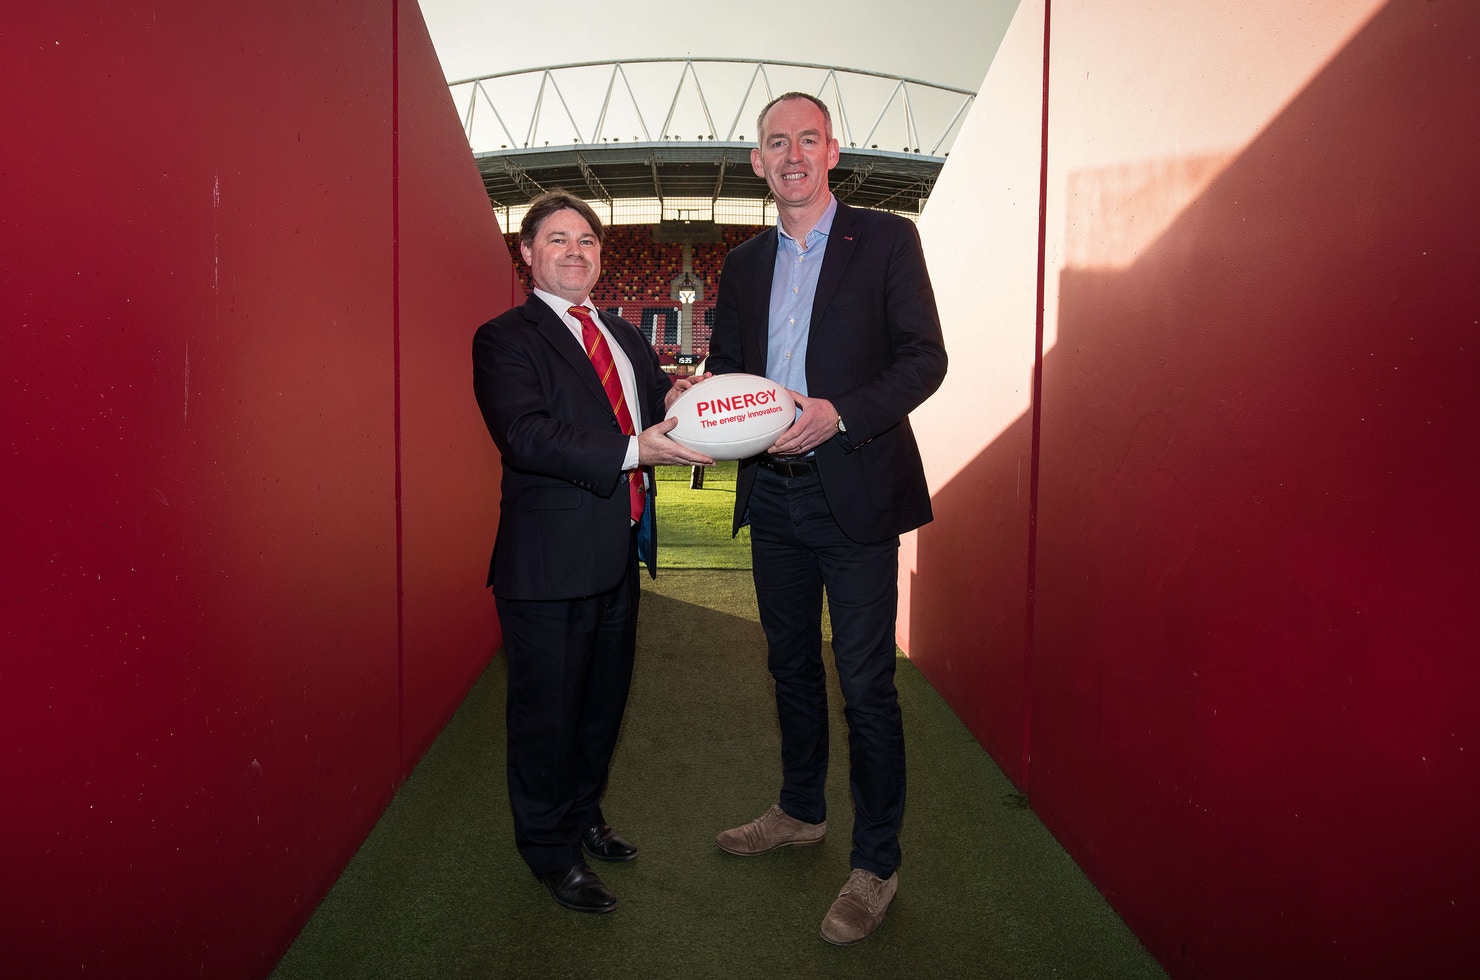 Pinergy continues to support Munster Rugby as official energy partner until the end of the 2021